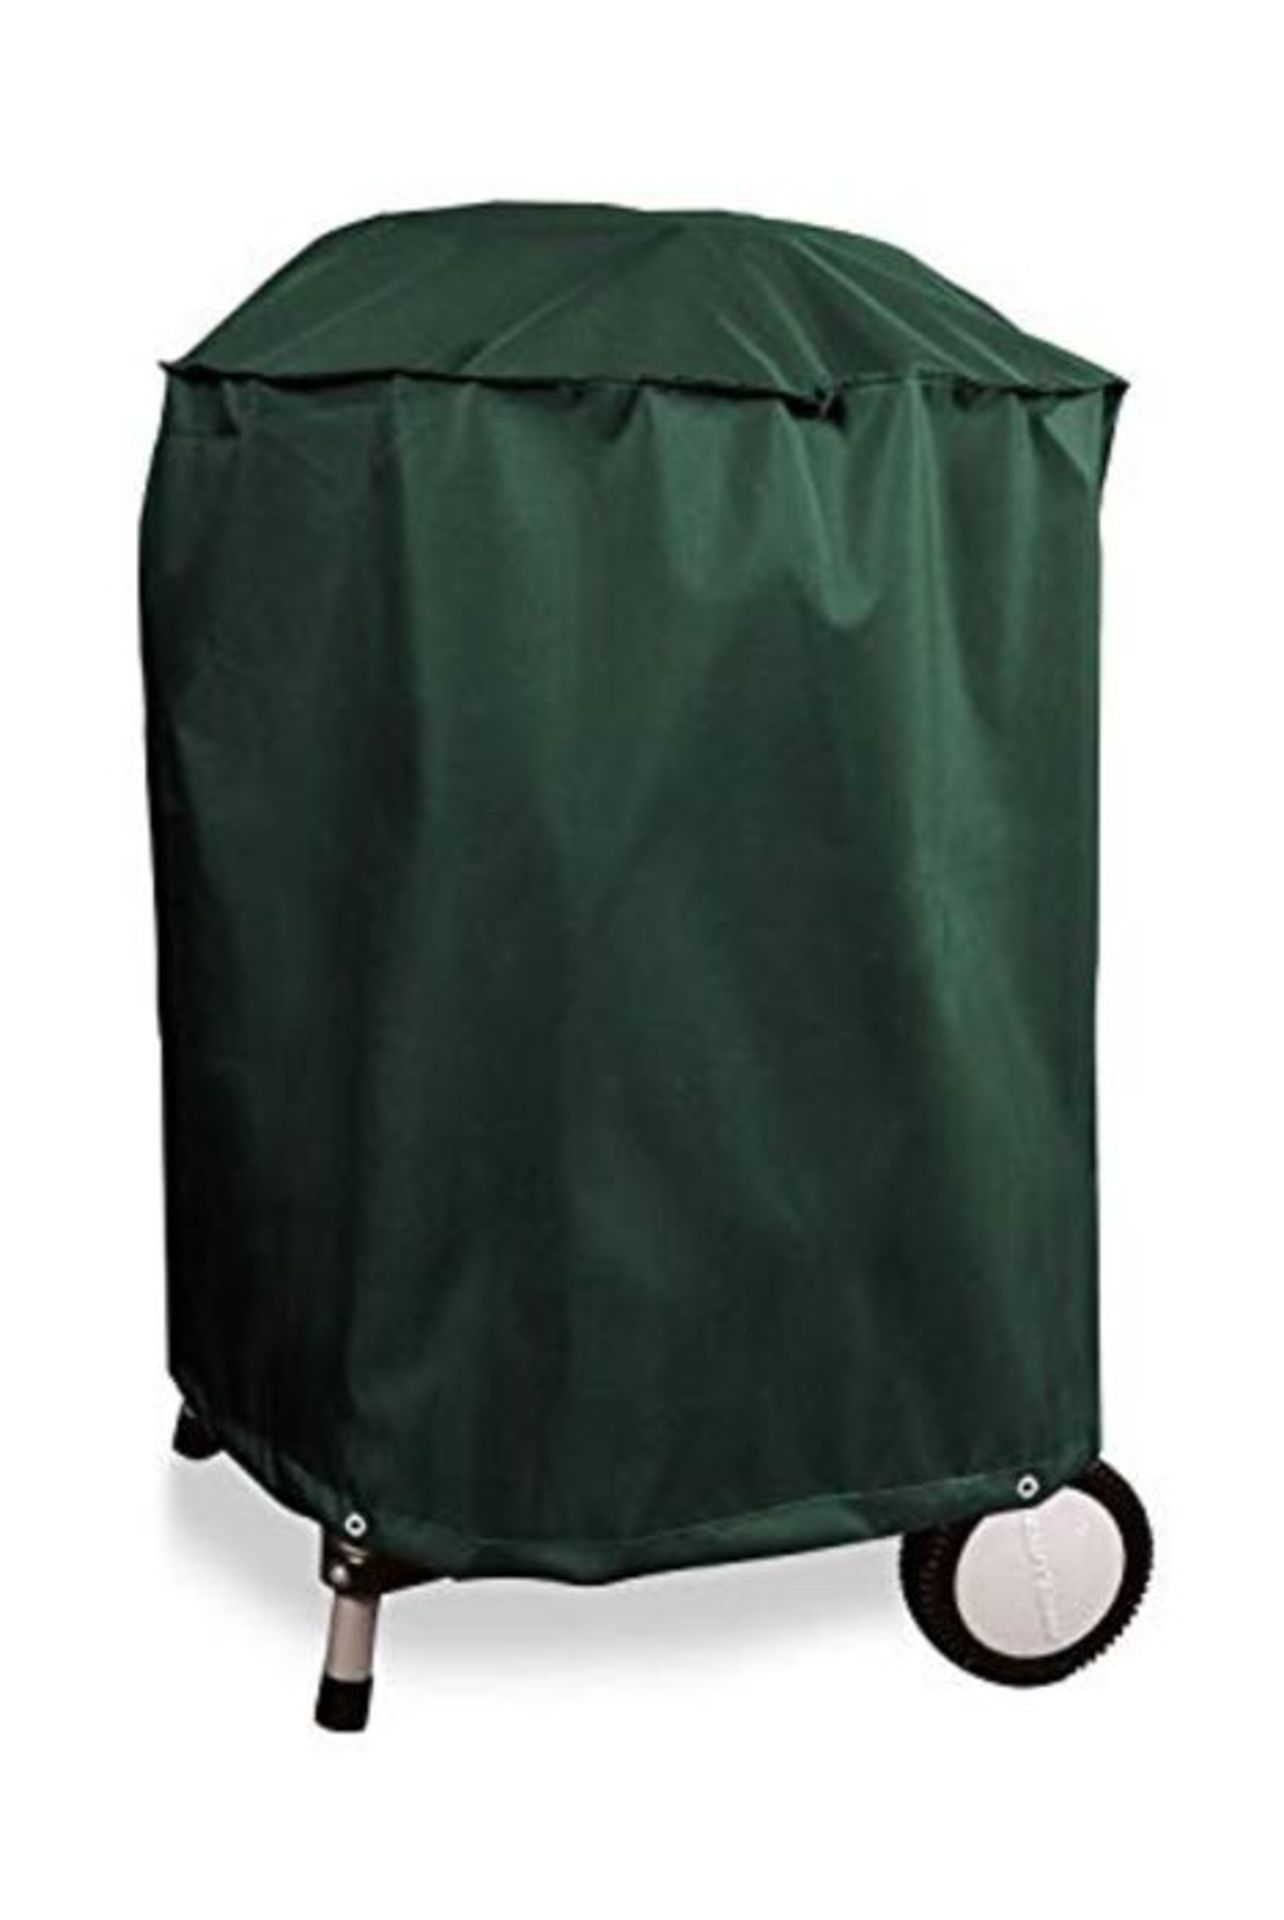 Bosmere Protector 6000 Dark Green Kettle BBQ Cover - Green, C700